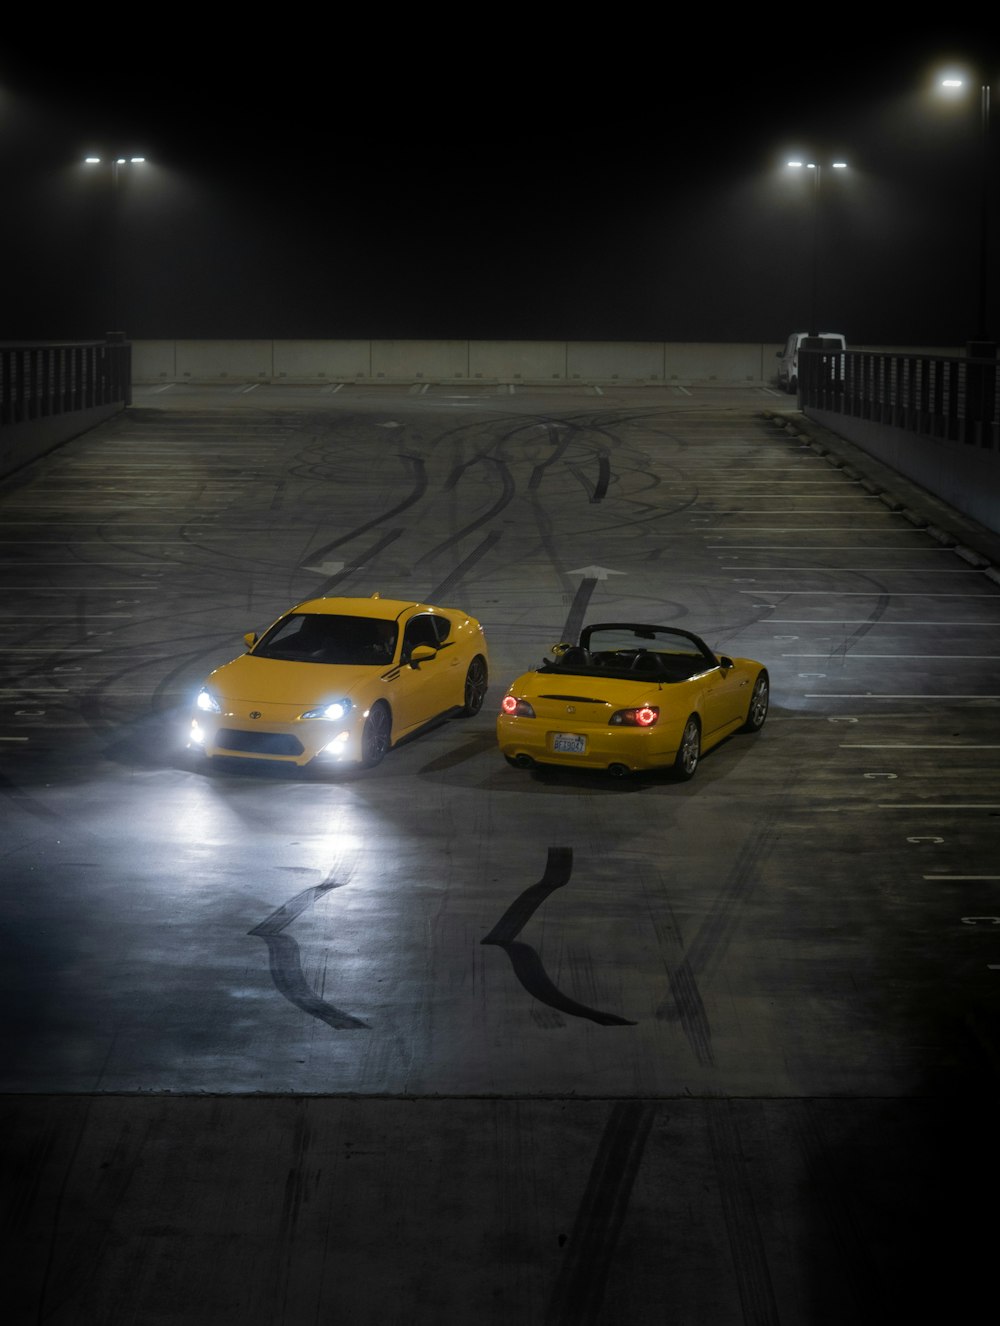 two yellow sports cars in a parking lot at night